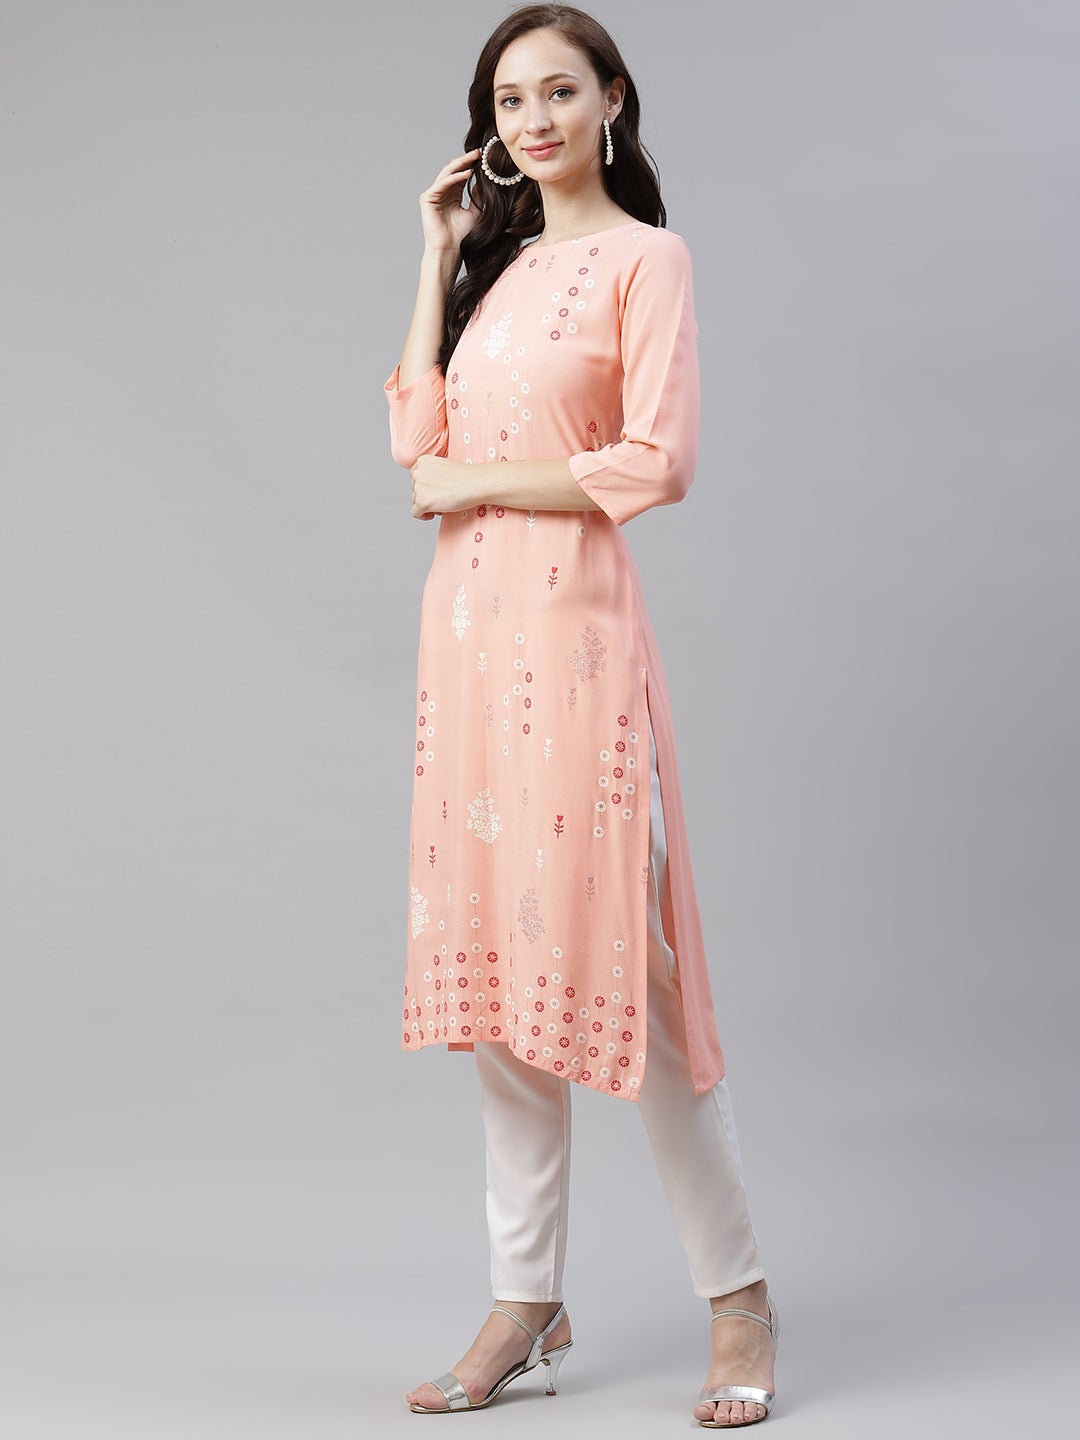 Mindhal Women's Peach Color Foil Printed Straight Kurta And Pant Set